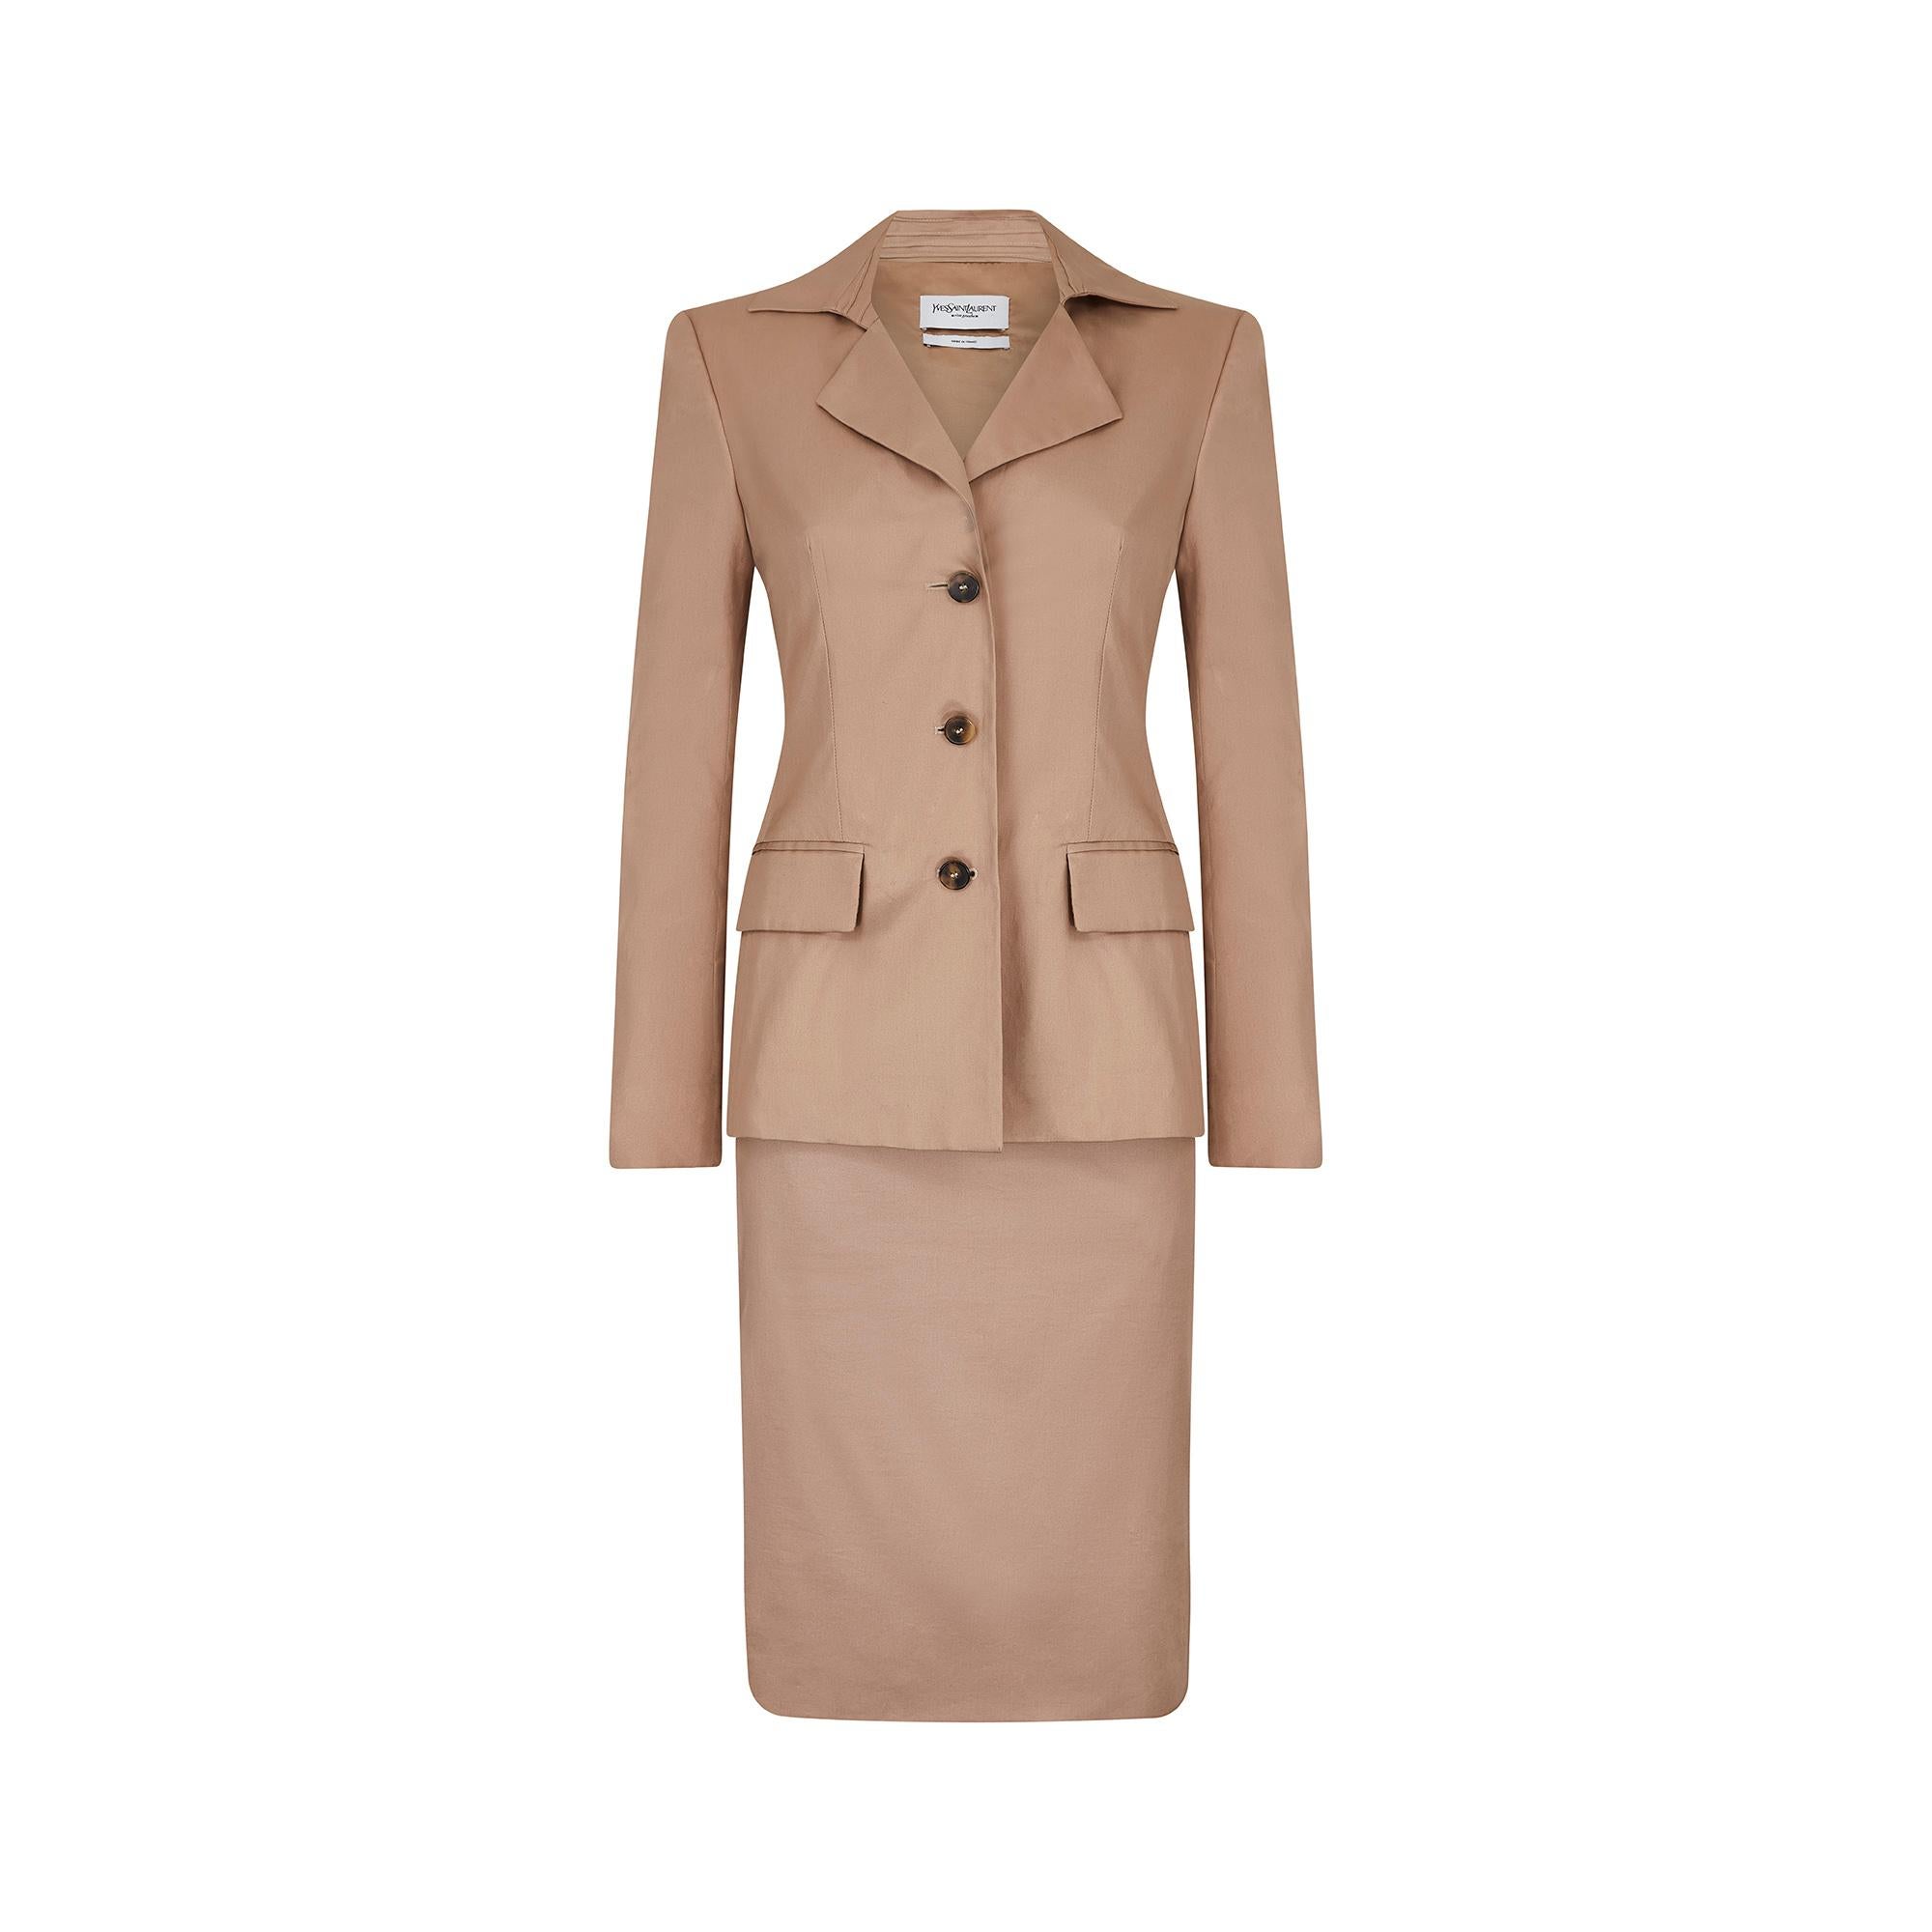 Spring / summer 2002 Tom Ford for Yves Saint Laurent khaki skirt suit from the famed safari collection. This safari-esque tailoring is something of a signature look, made popular by Yves Saint Laurent in 1968 with the now infamous Saharienne dress. 